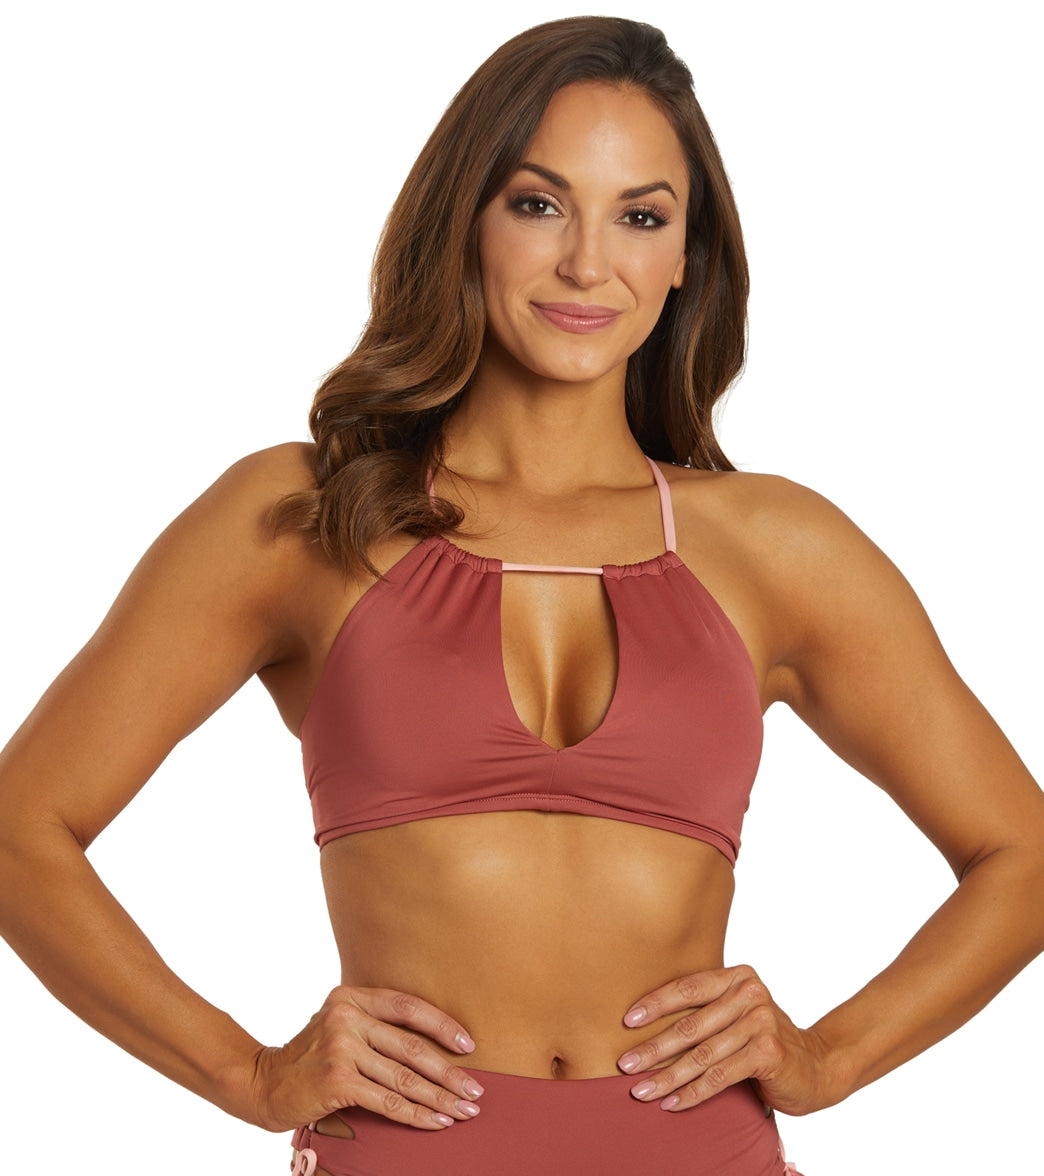 Nike Women's Solid Lace-Up High Neck Bikini Top at SwimOutlet.com